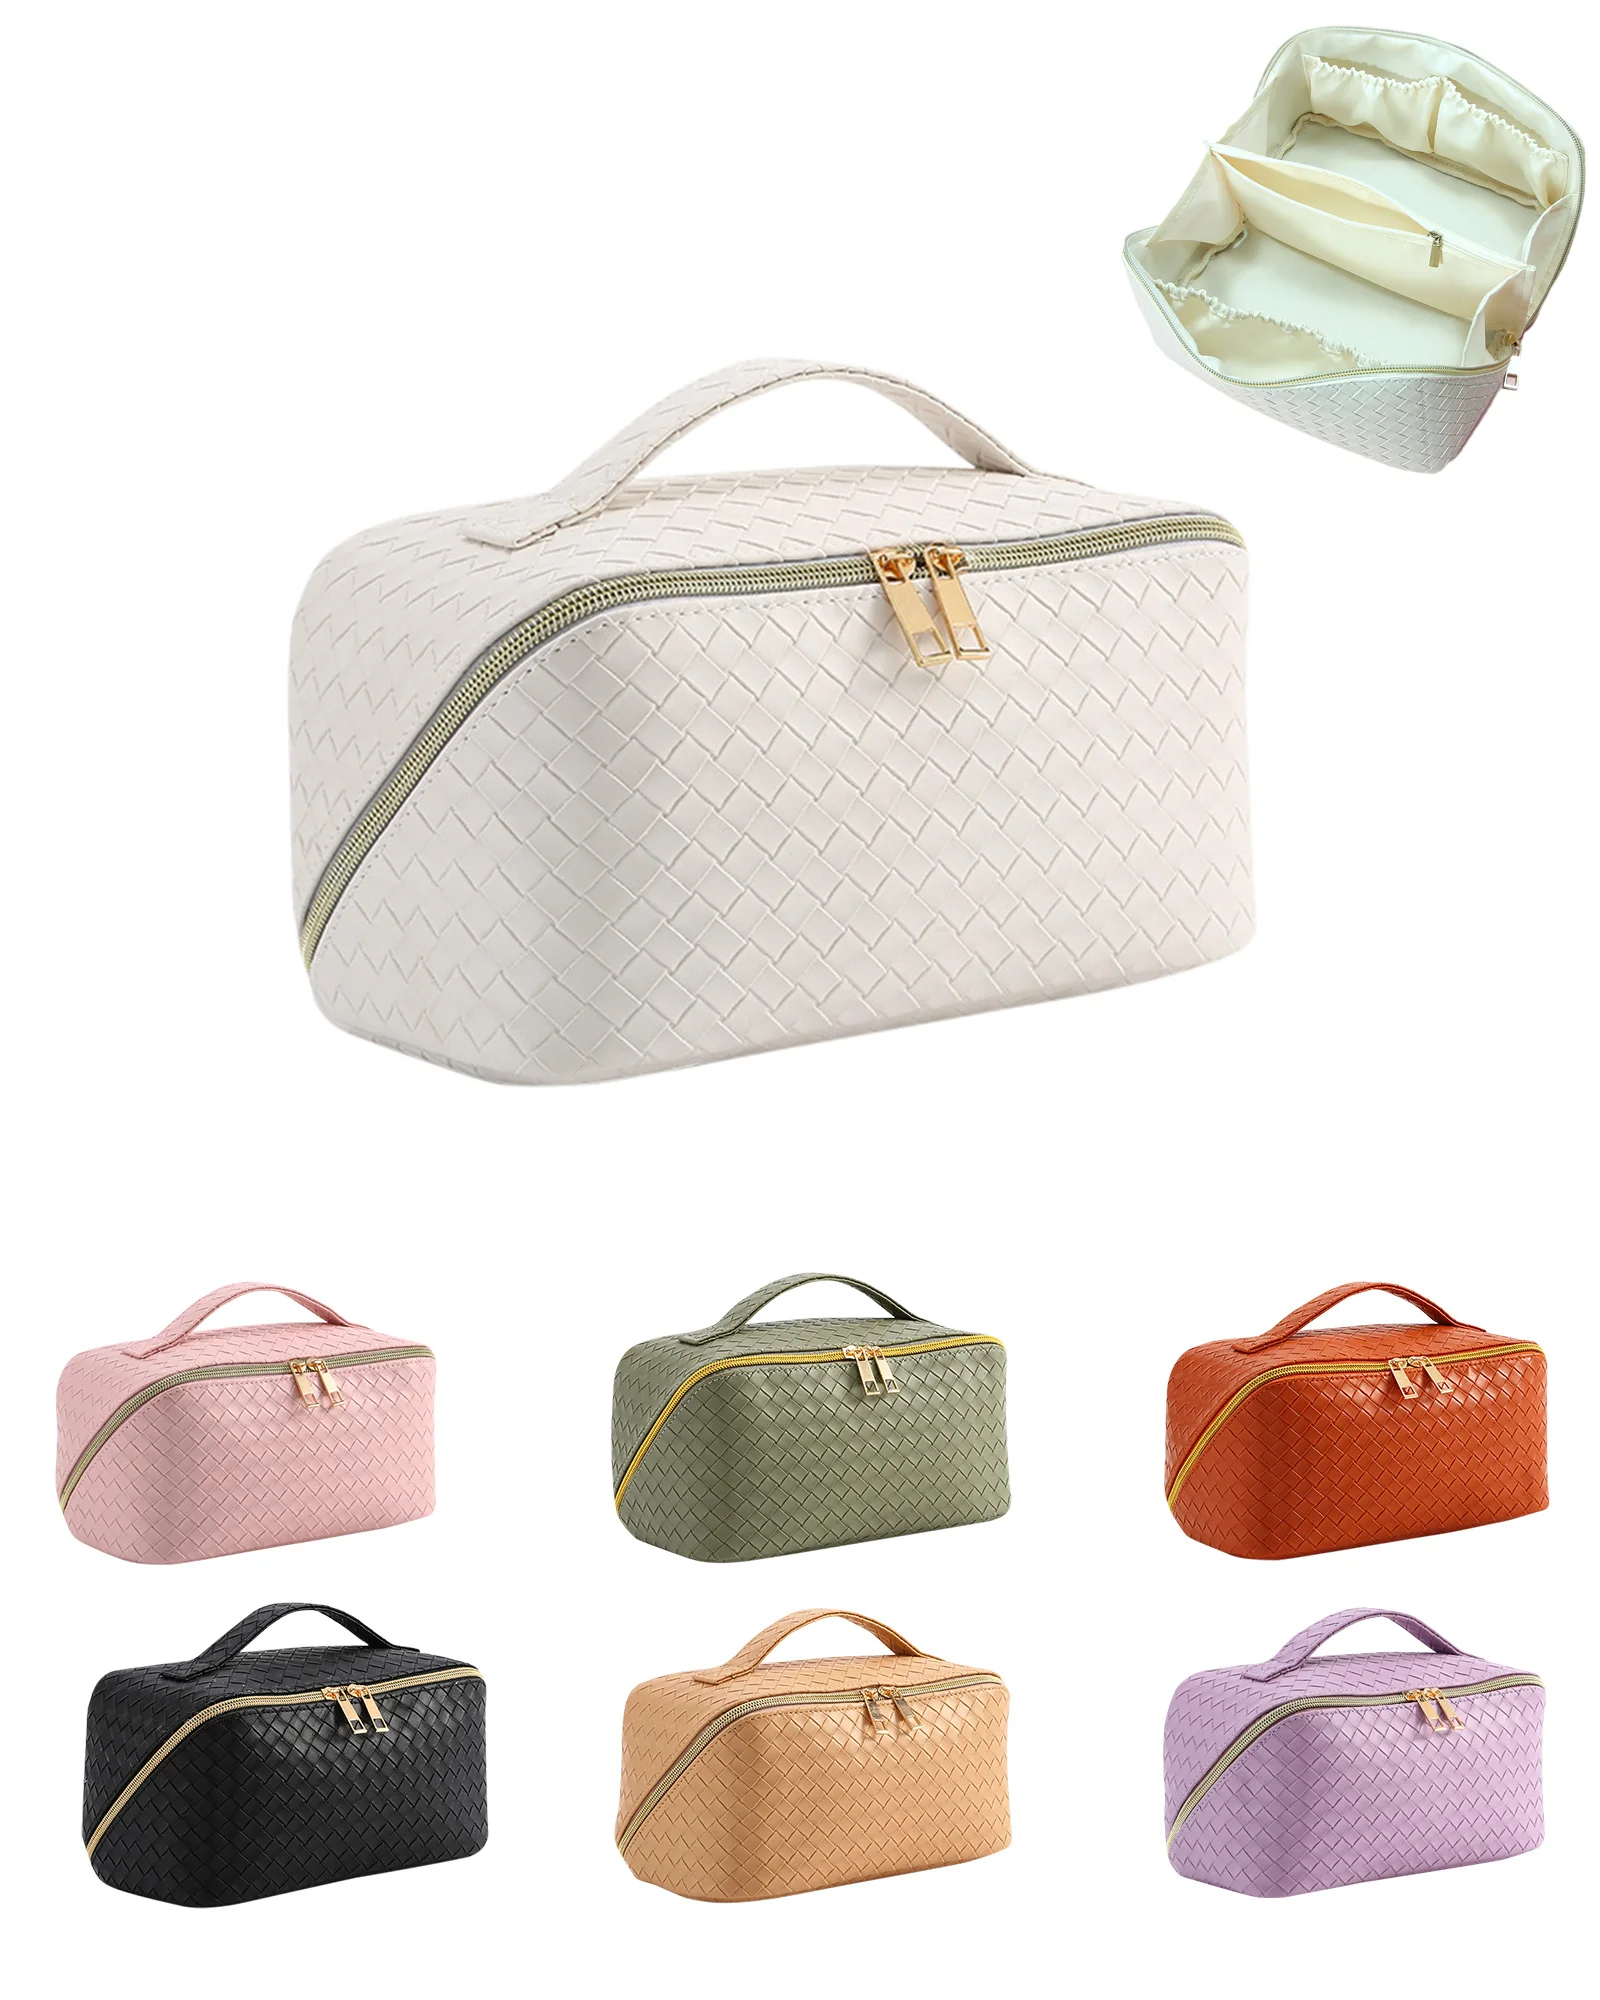 Large Capacity Waterproof PU Leather Makeup Pouch with Weave Pattern Fashion Cosmetic Bag